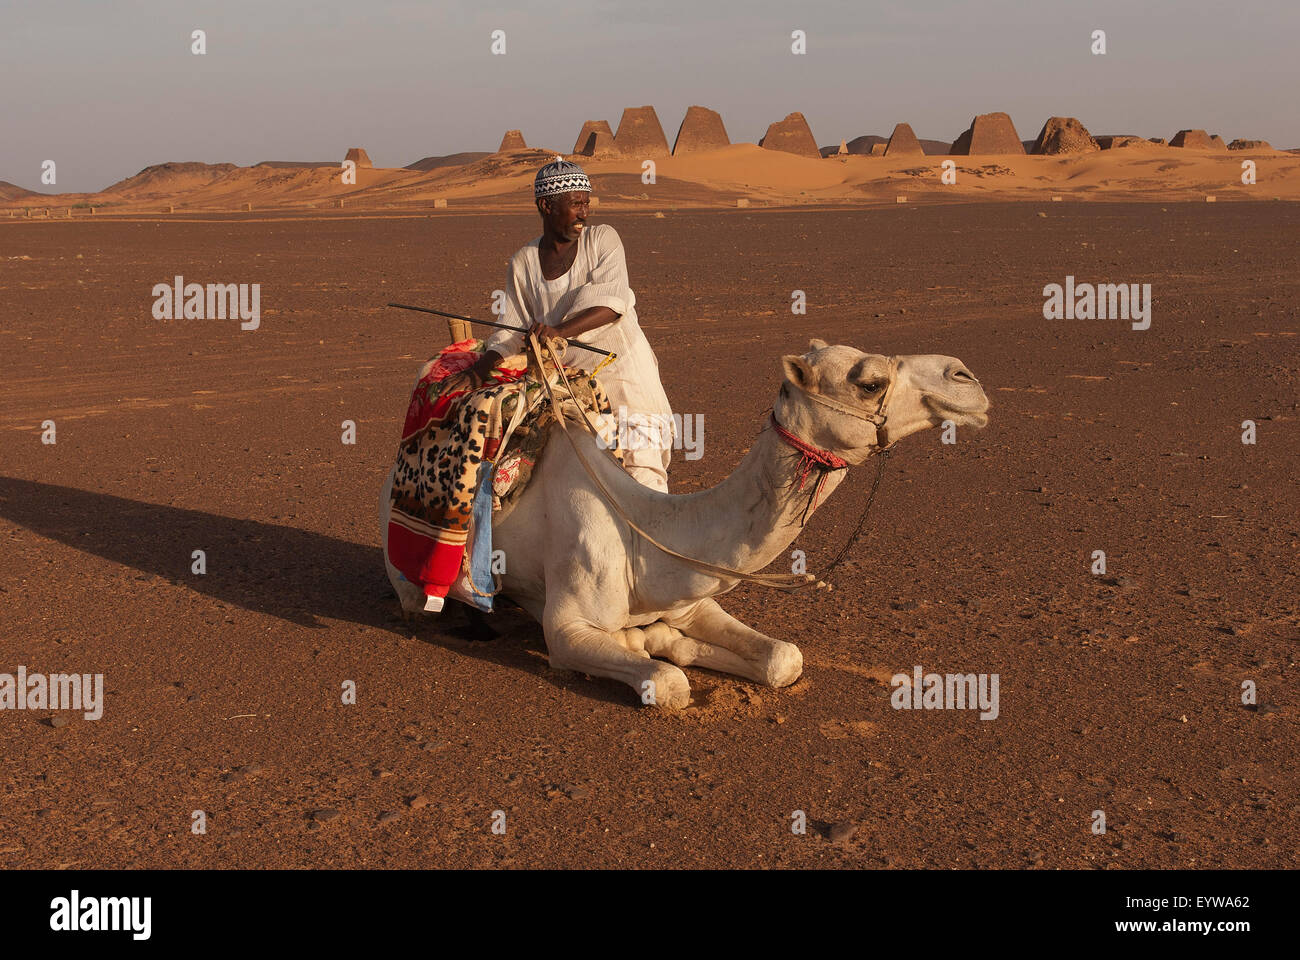 Local man with a dromedary in the sand,the pyramids of Meroe behind, Nubian Desert, Nubia, Nahr an-Nil, Sudan Stock Photo